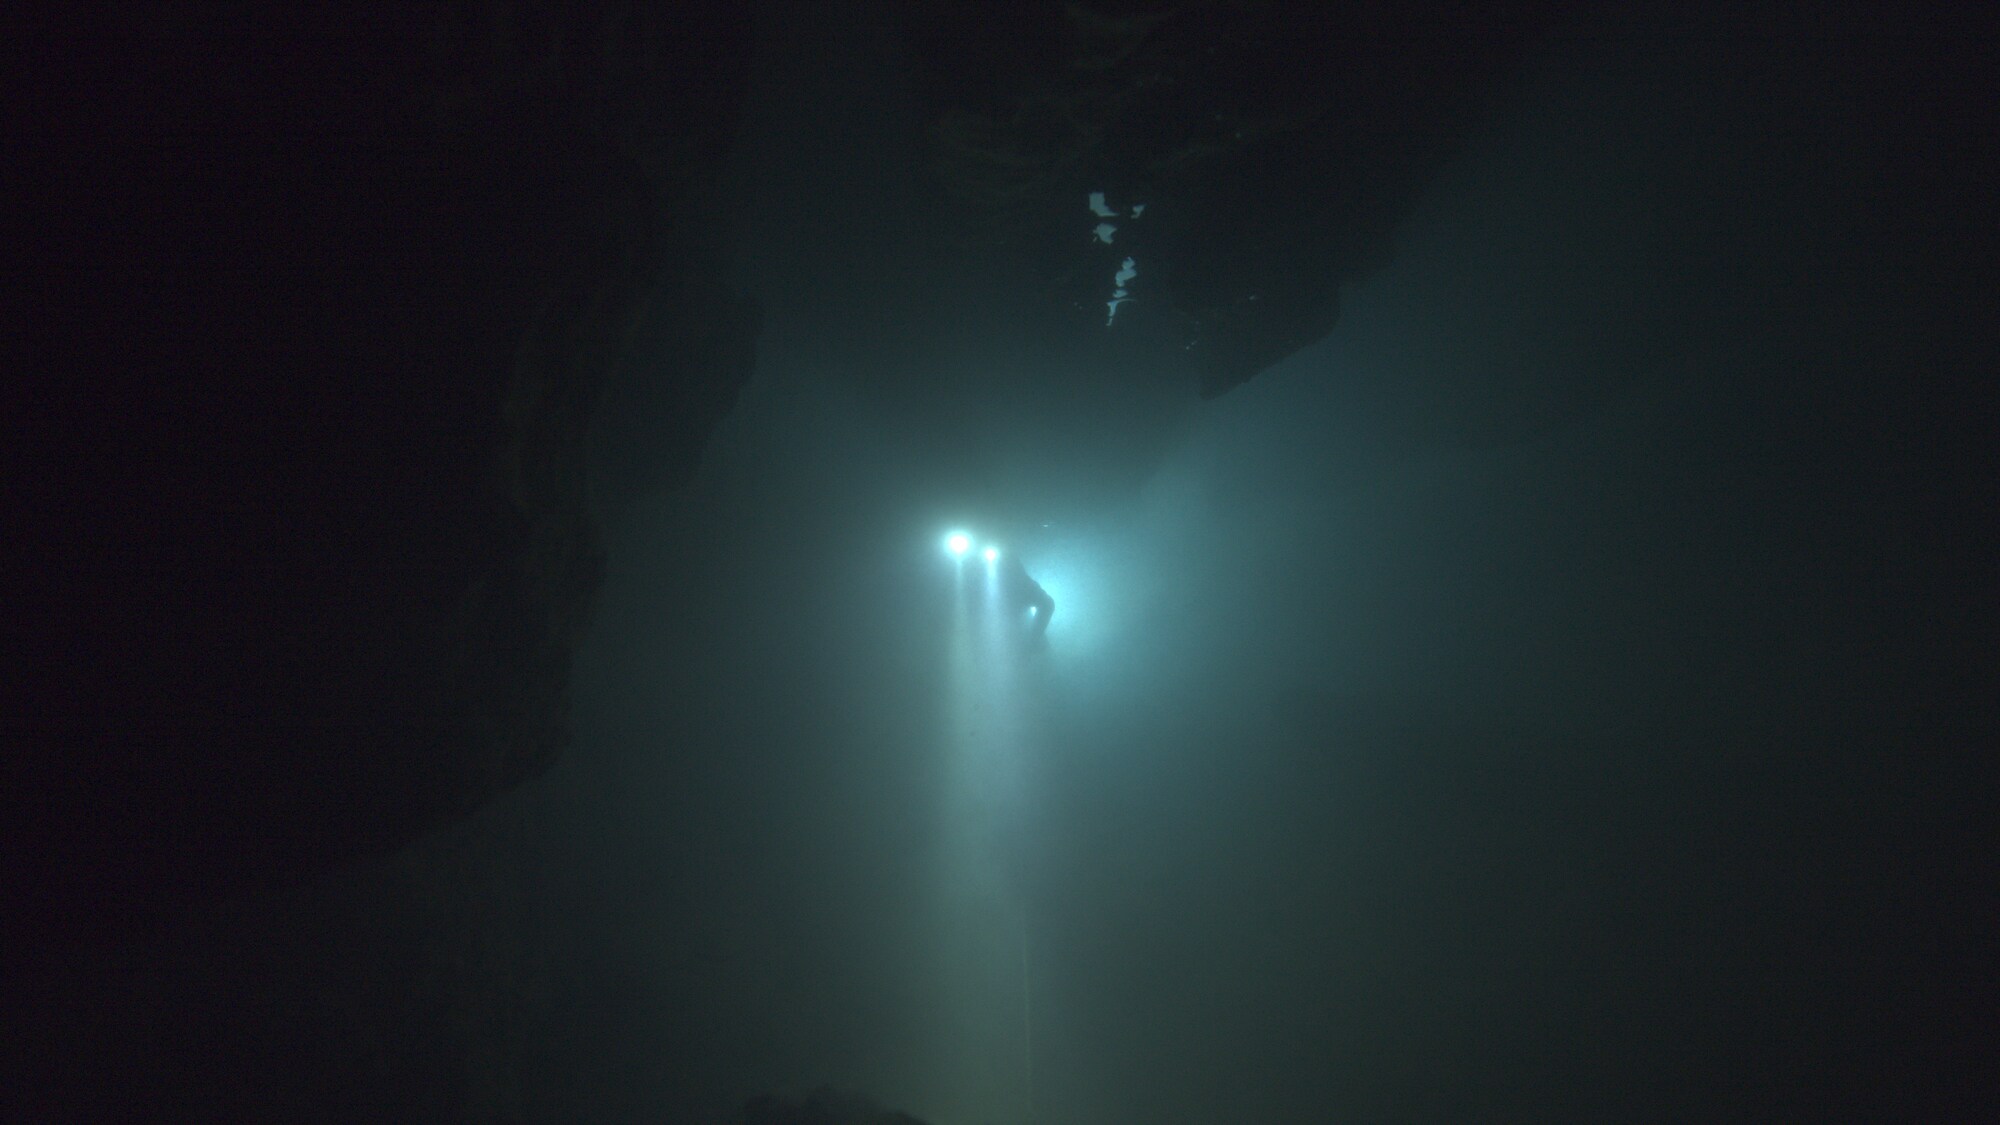 A diver floats through an underwater cave.  THE RESCUE chronicles the 2018 rescue of 12 Thai boys and their soccer coach, trapped deep inside a flooded cave. E. Chai Vasarhelyi and Jimmy Chin reveal the perilous world of cave diving, bravery of the rescuers, and dedication of a community that made great sacrifices to save these young boys. (Credit: National Geographic)